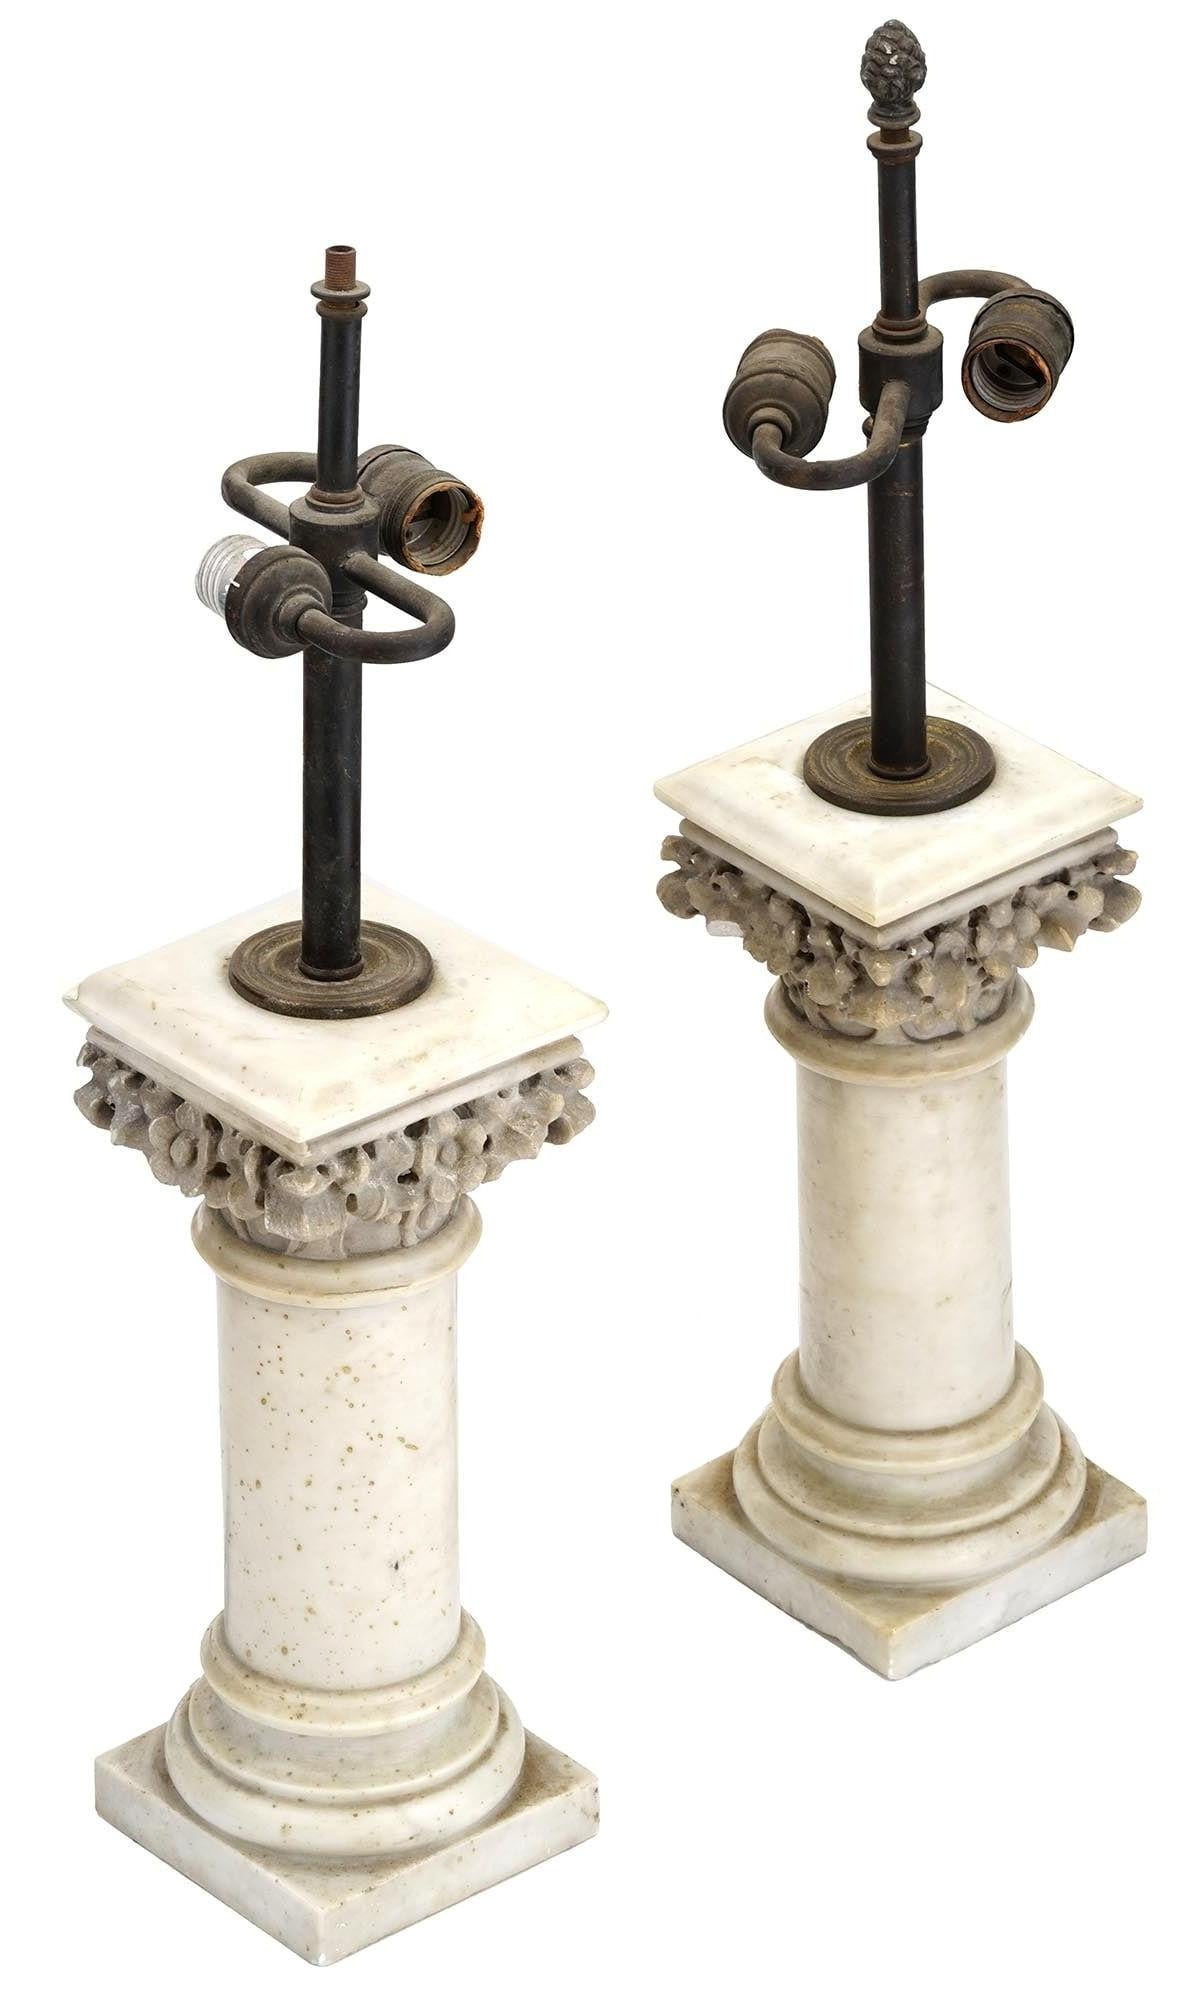 Pair of antique carved white marble columns with floral capitals converted to table lamps in the early 20th century.